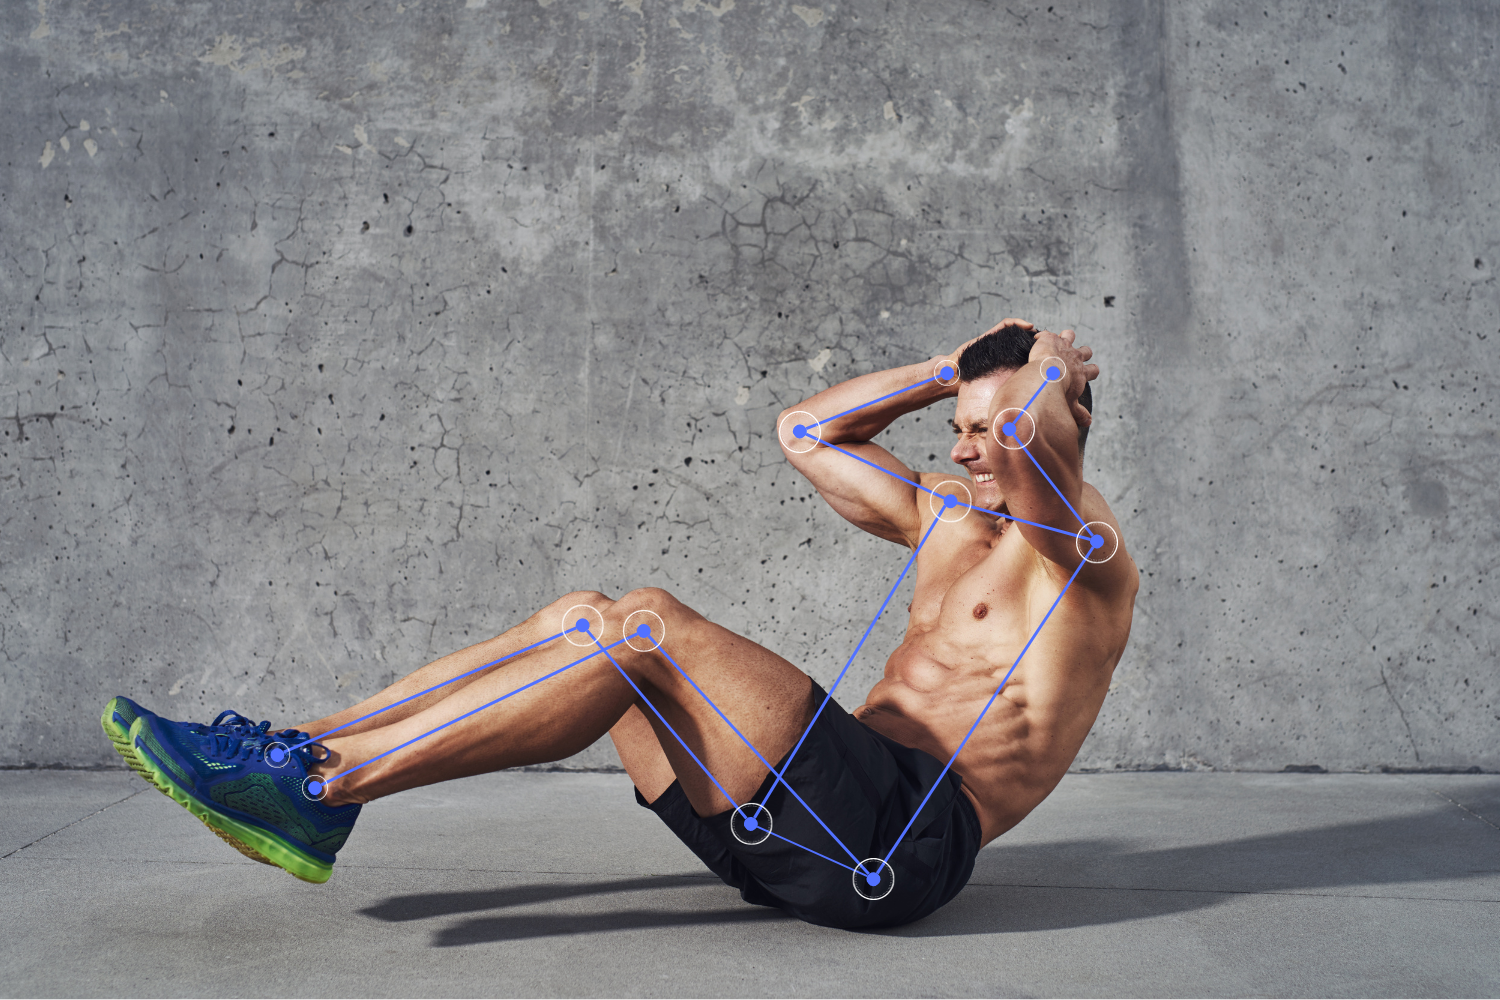 Image shows a man doing sit ups, with MediaPipe landmarks on his joints, detected using AI.